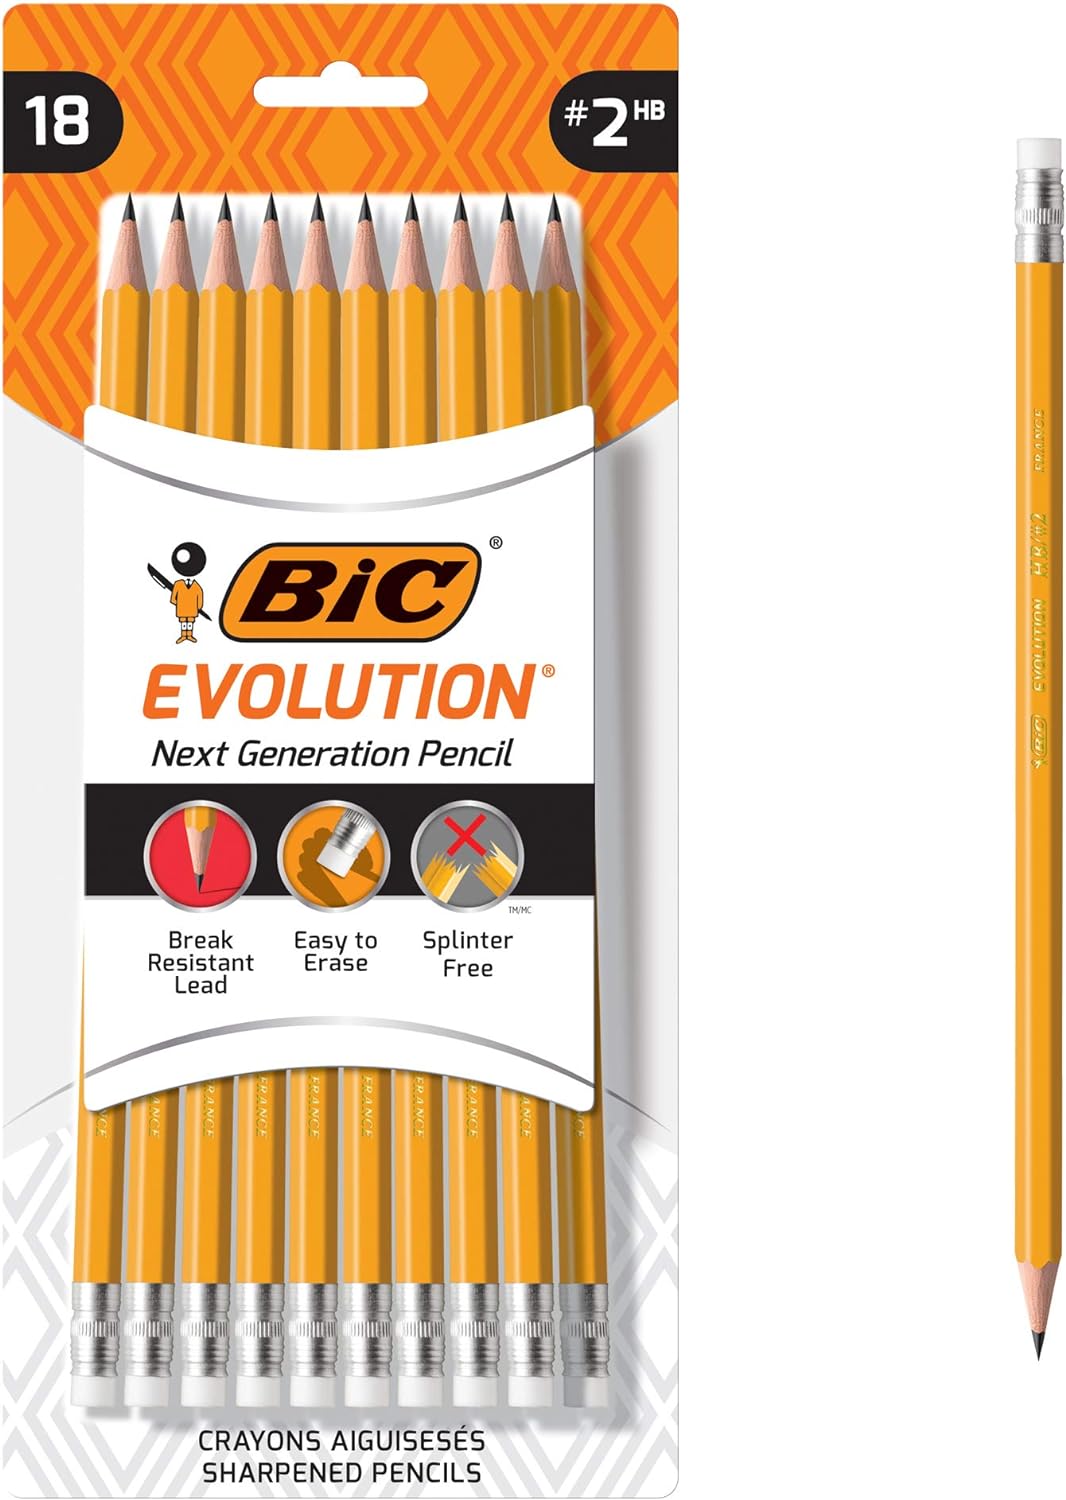 BIC Evolution #2 Lead Pencil, Yellow Barrel, Black, Certified Non-Toxic Ideal For Classroom & Home, 18-Count